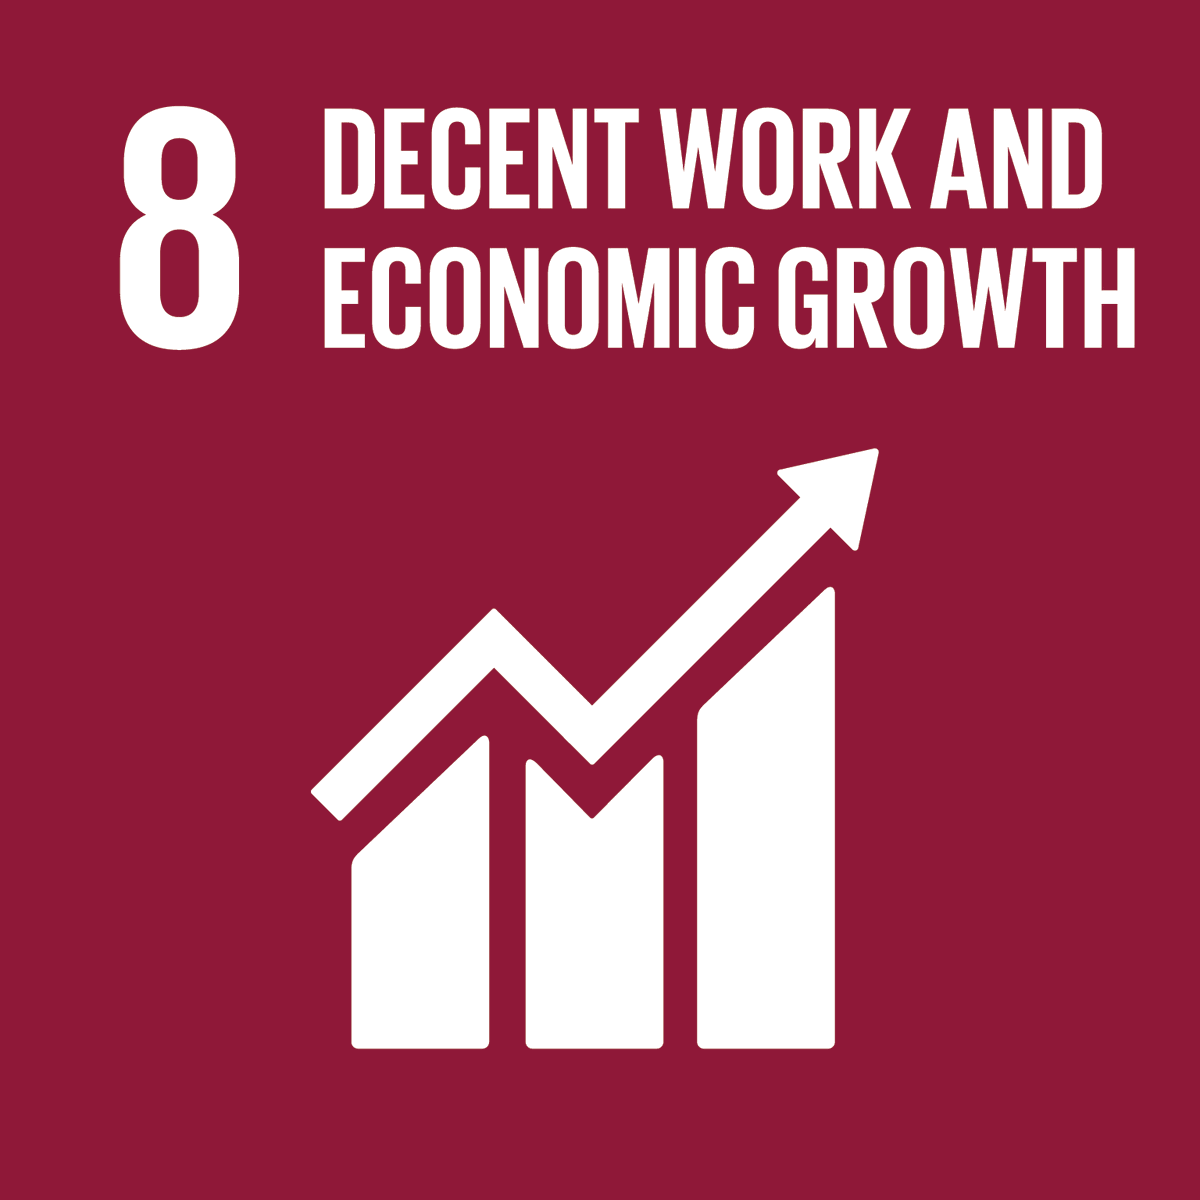 54) SDG #8: Promote sustained, inclusive, and sustainable economic growth, full and productive employment, and decent work for all.